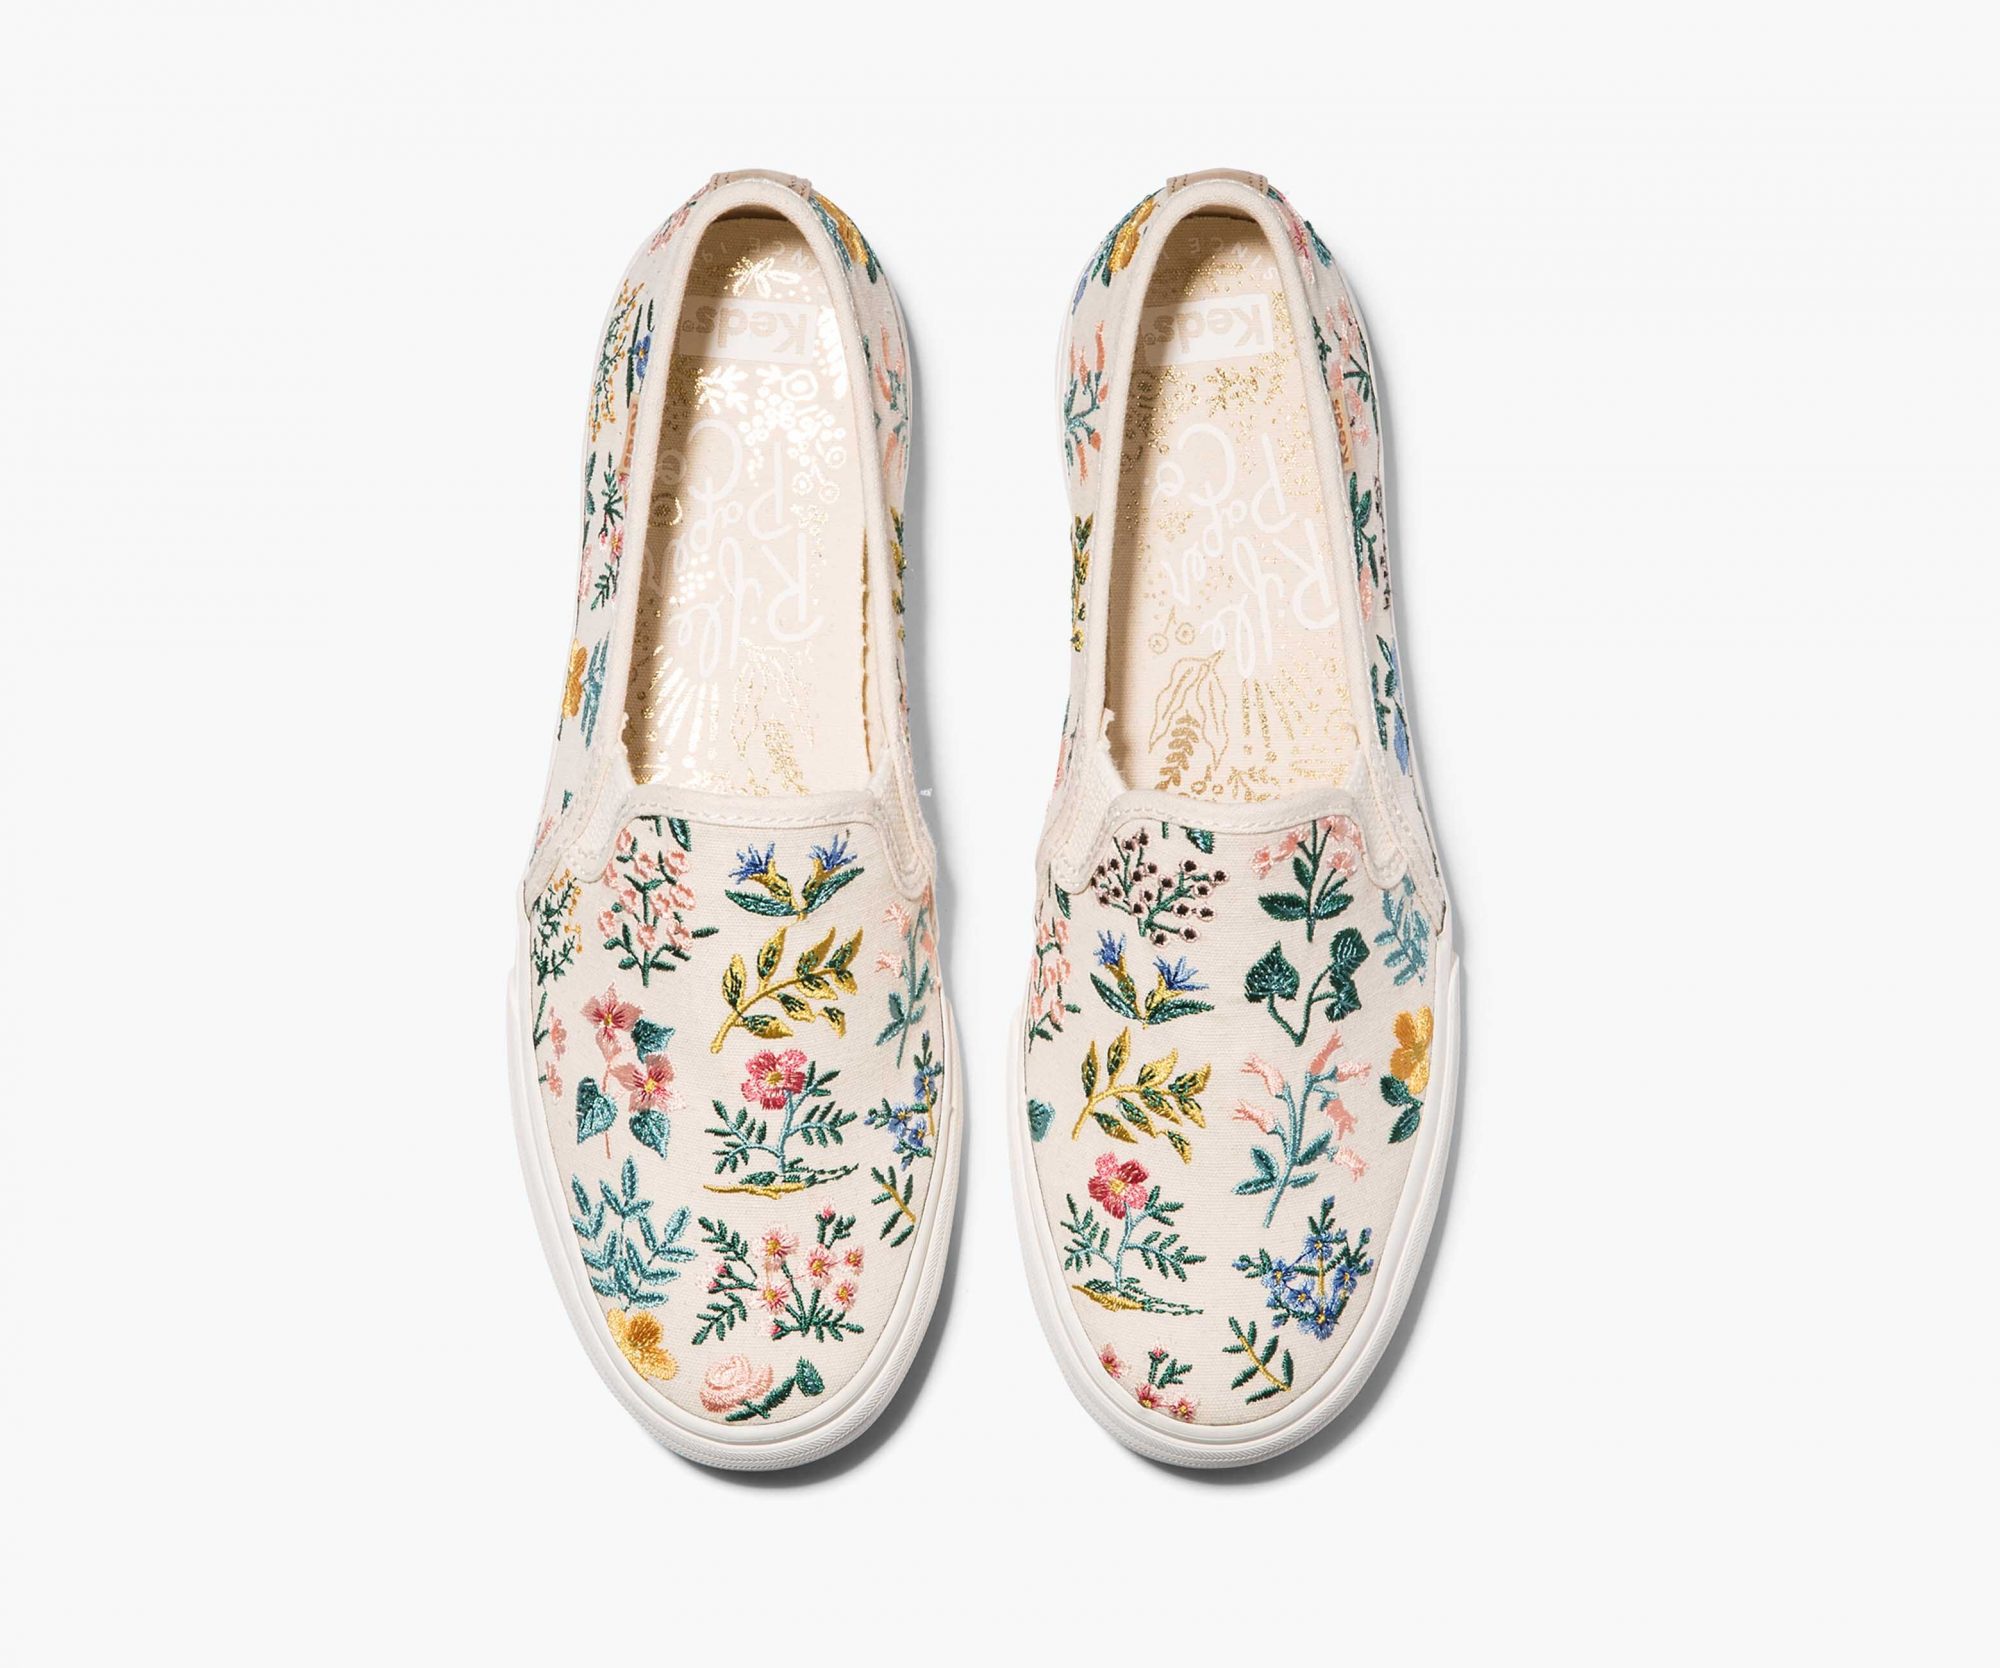 Rifle Paper Co. x Keds fall 2020 collection wildflower embroidered double decker slip on